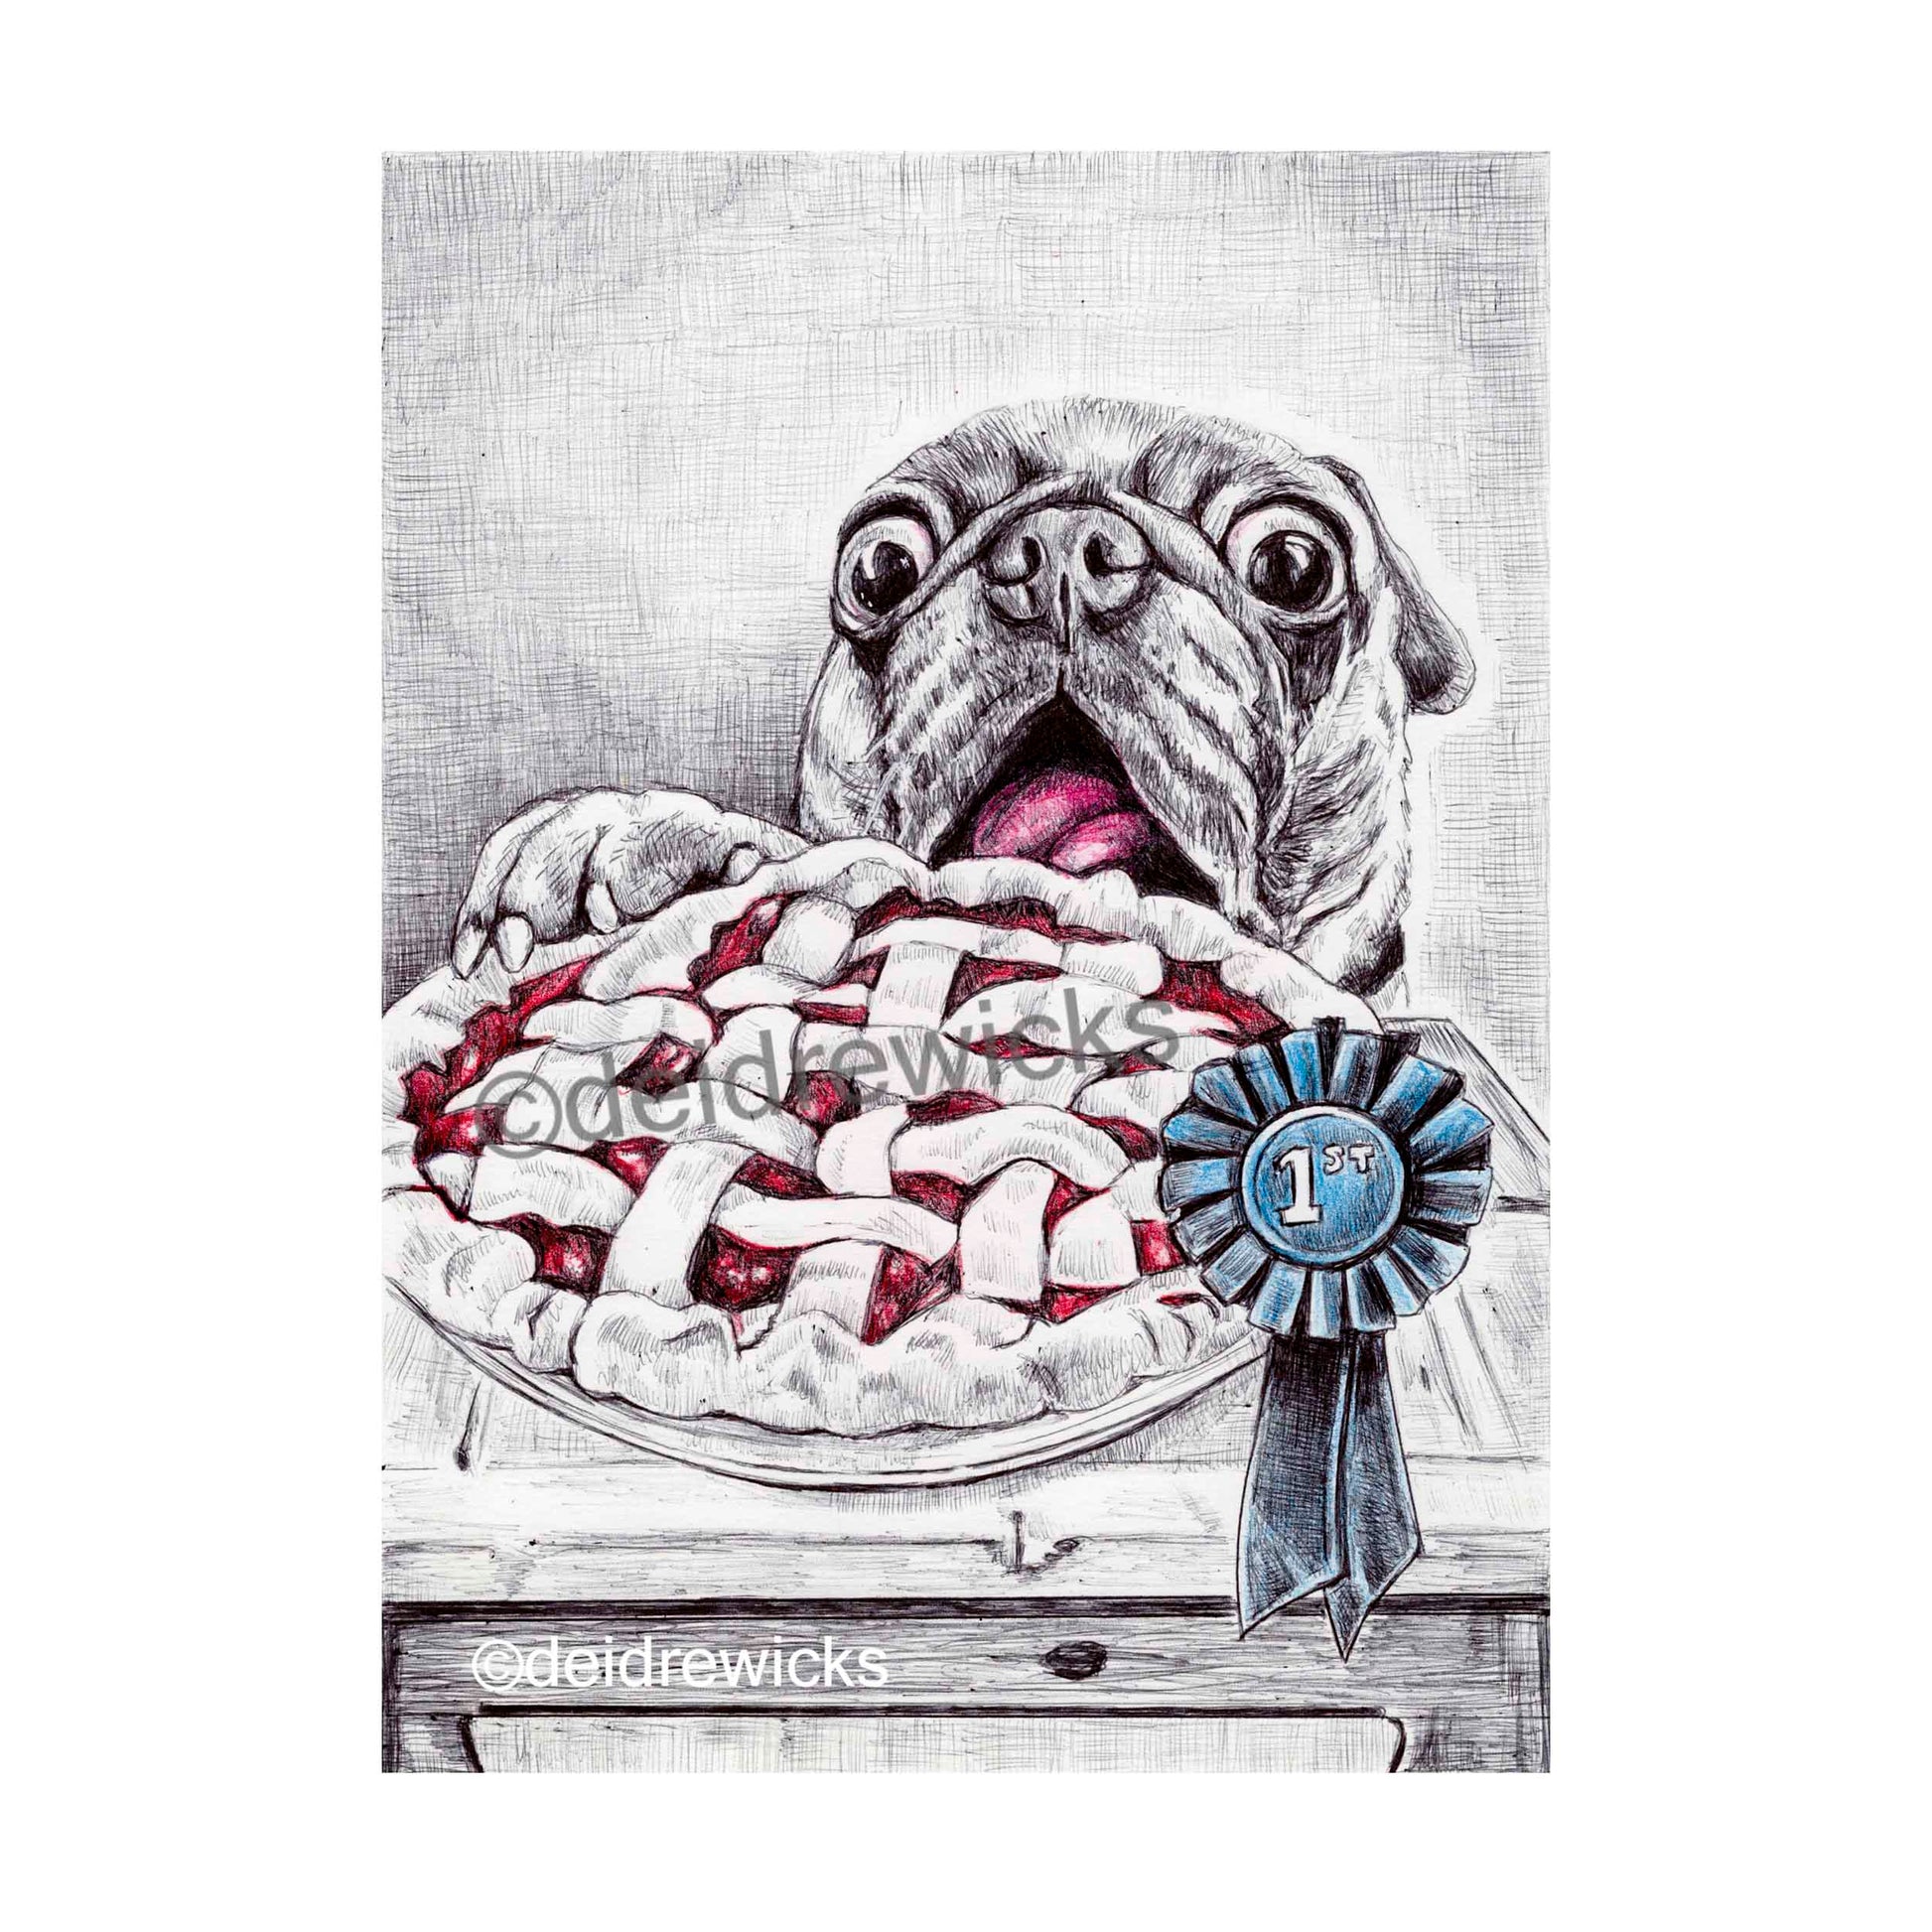 Ballpoint pen drawing of a pug dog about to steal a blue ribbon prize winning pie. Art by Deidre Wicks